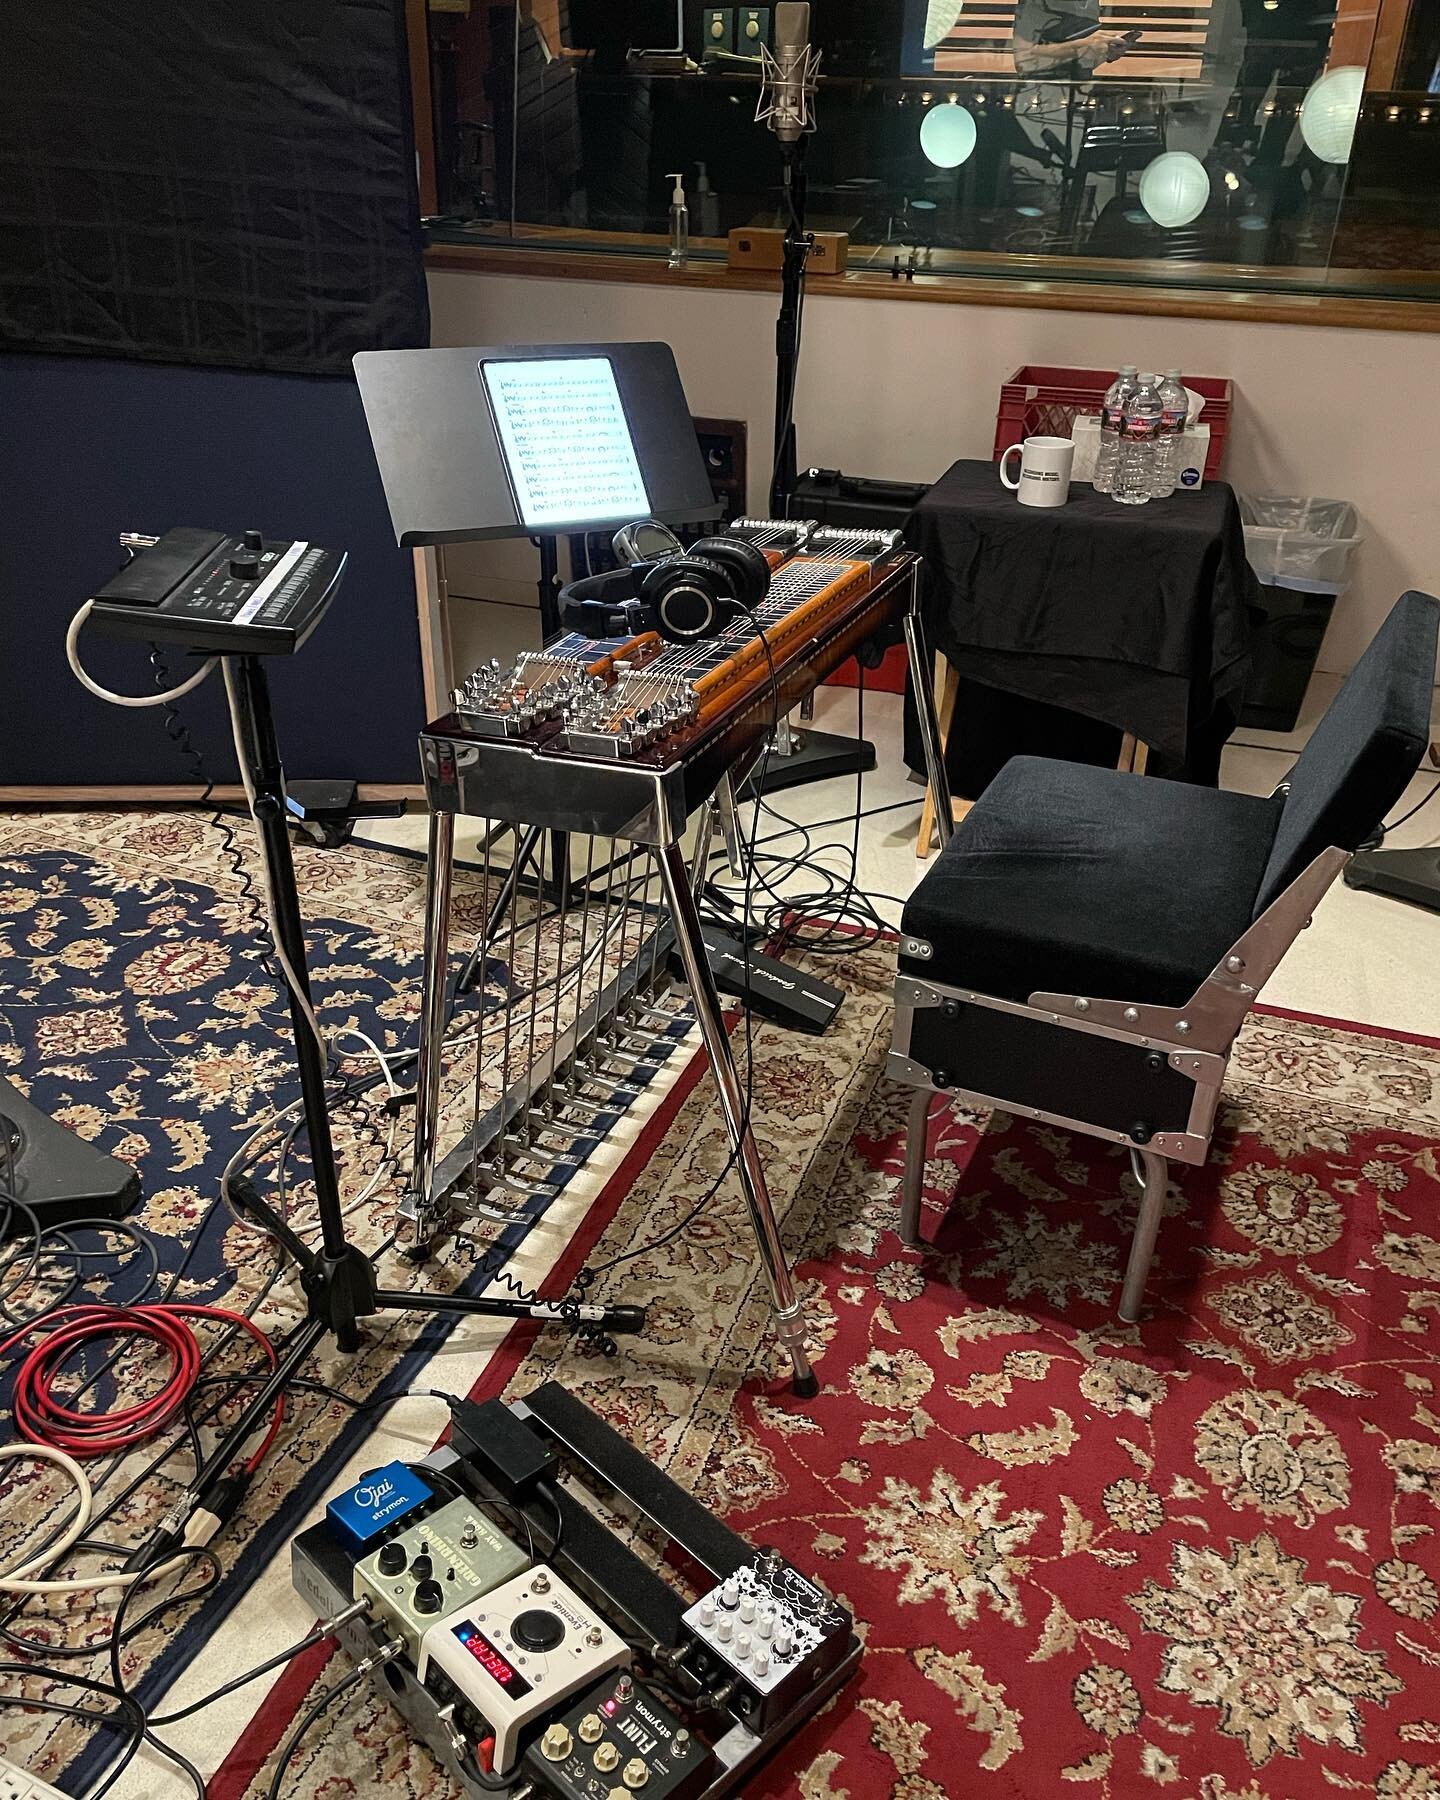 My zone tracking pedal steel at @villagestudios 🙌

sounds from @msasteelguitars @goodrichsound @earthquakerdev @eventideaudio @strymonengineering @quilterlabs 
@way.huge.electronics
@royerlabs @shure RCA OG room mic